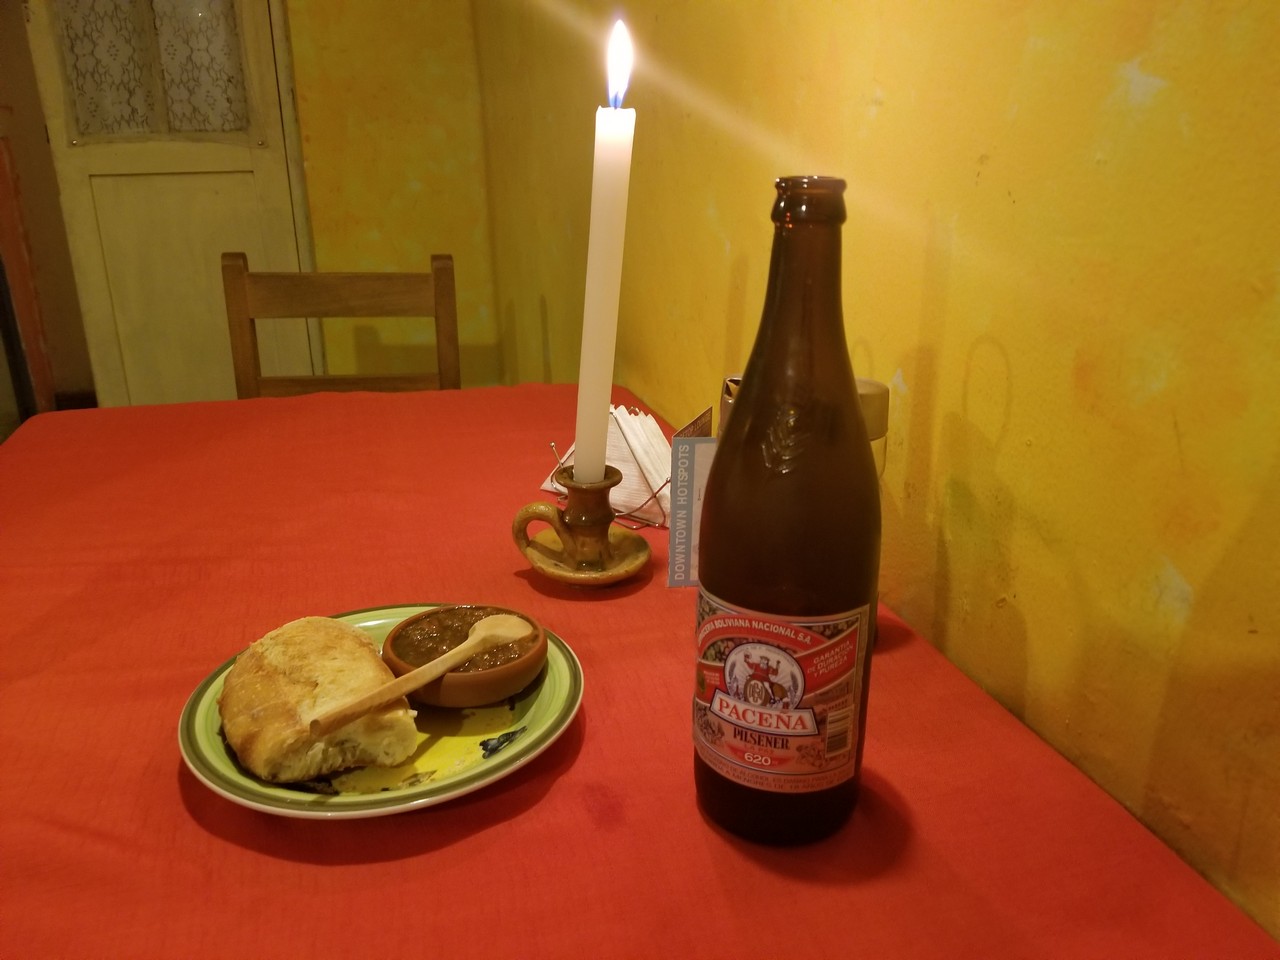 a bottle of beer and a plate of food on a table with a candle